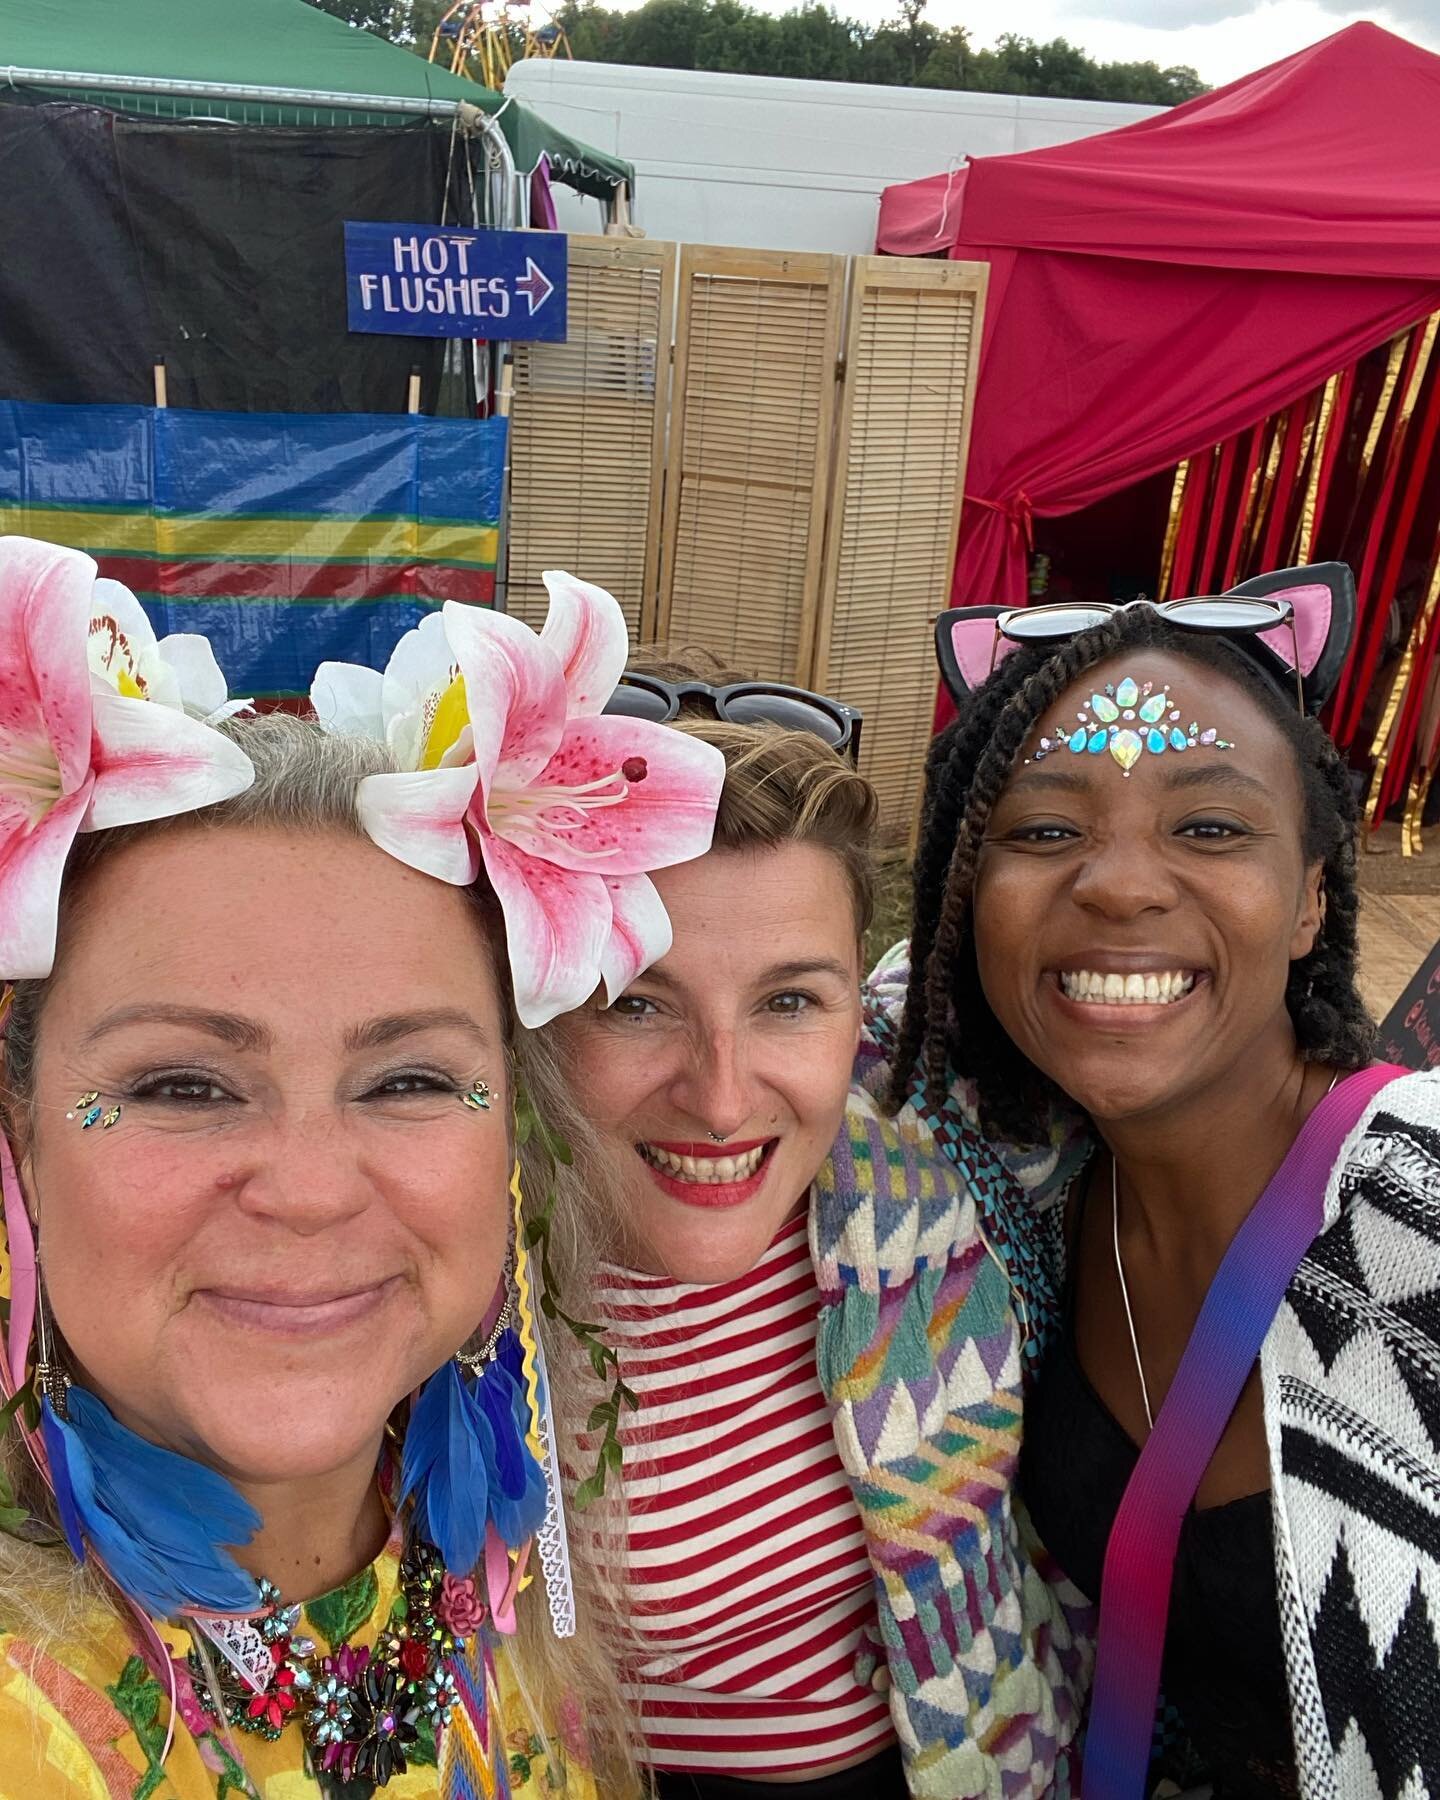 Throwback to last summer when we met the wonderful @lottie.randomly at Shambala Festival 🌸

After two years of doing menstrual cycle work cooped up at home @natalie.kmartin and I were VERY excited to meet another menstrual cycle educator IRL (you ju